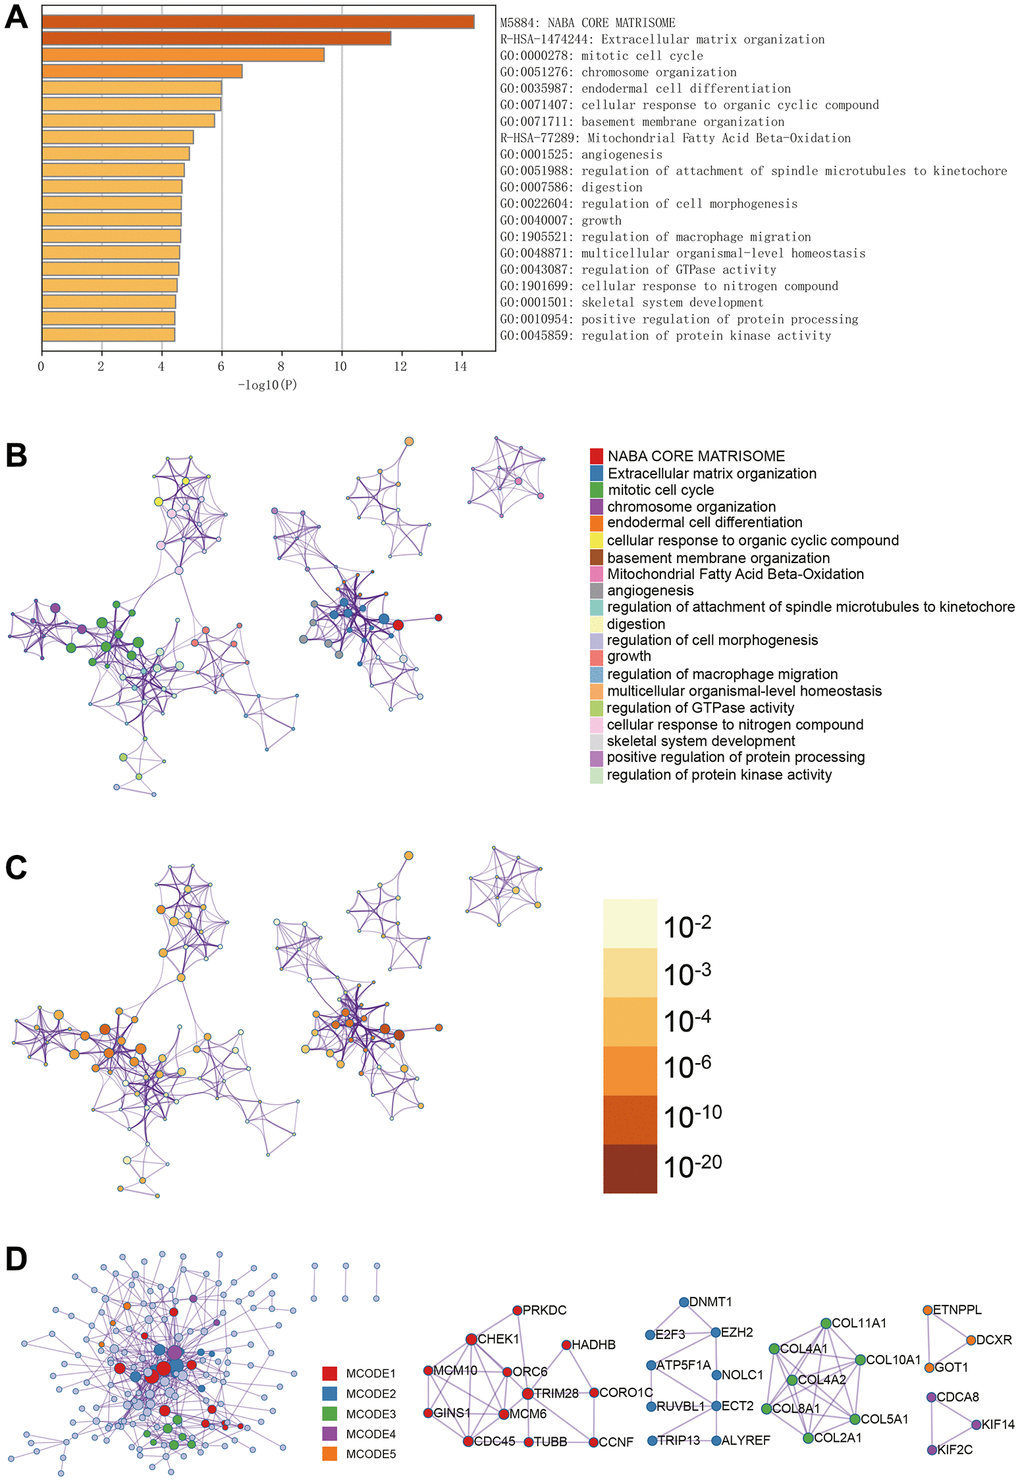 Metascape enrichment analysis. (A) GO enrichment highlights macrophage migration control and mitotic cell cycle. (B–D) Output the enrichment network colored by enrichment terms; output the enrichment network colored by p-value; visualize the association and confidence representing each enrichment item.